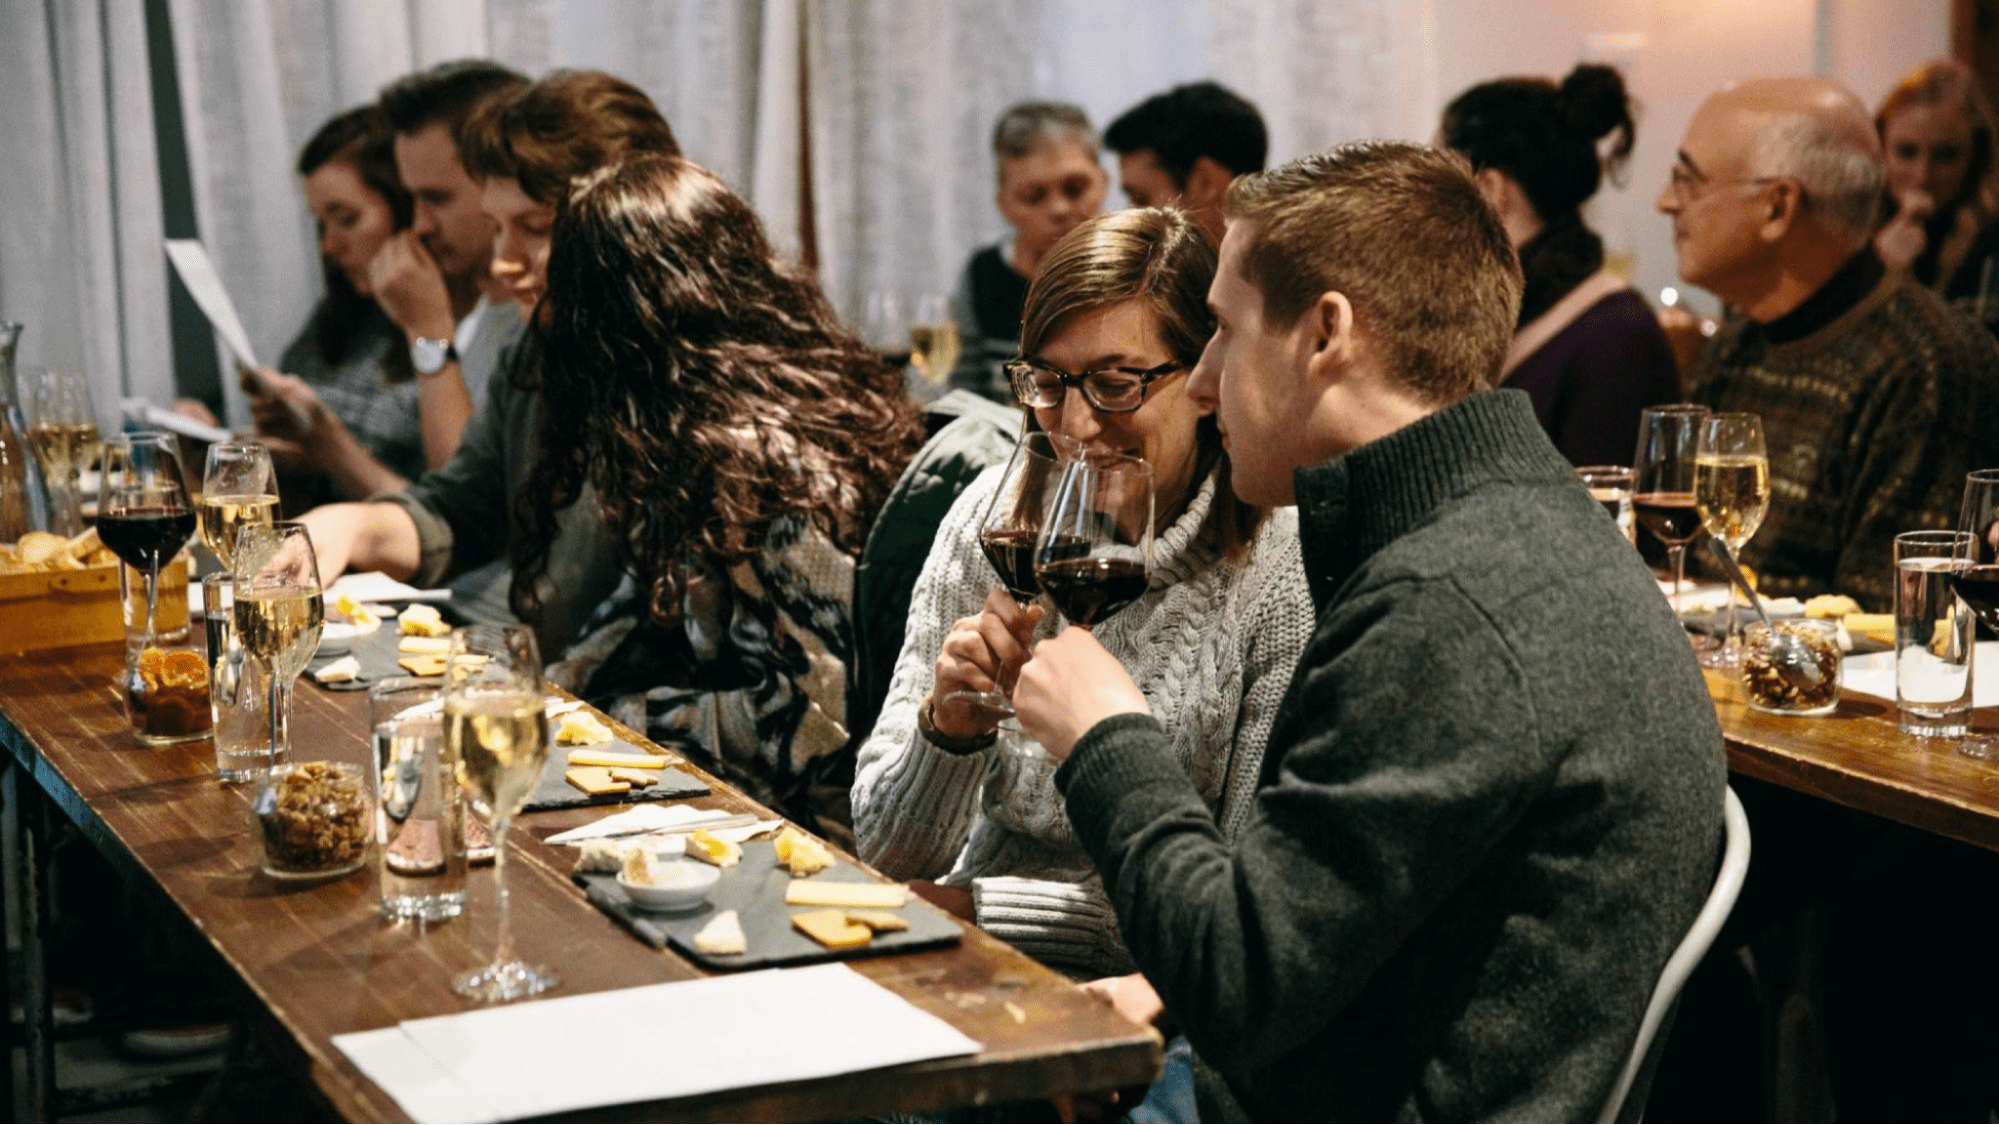 Couple tasting cheese and wine at event